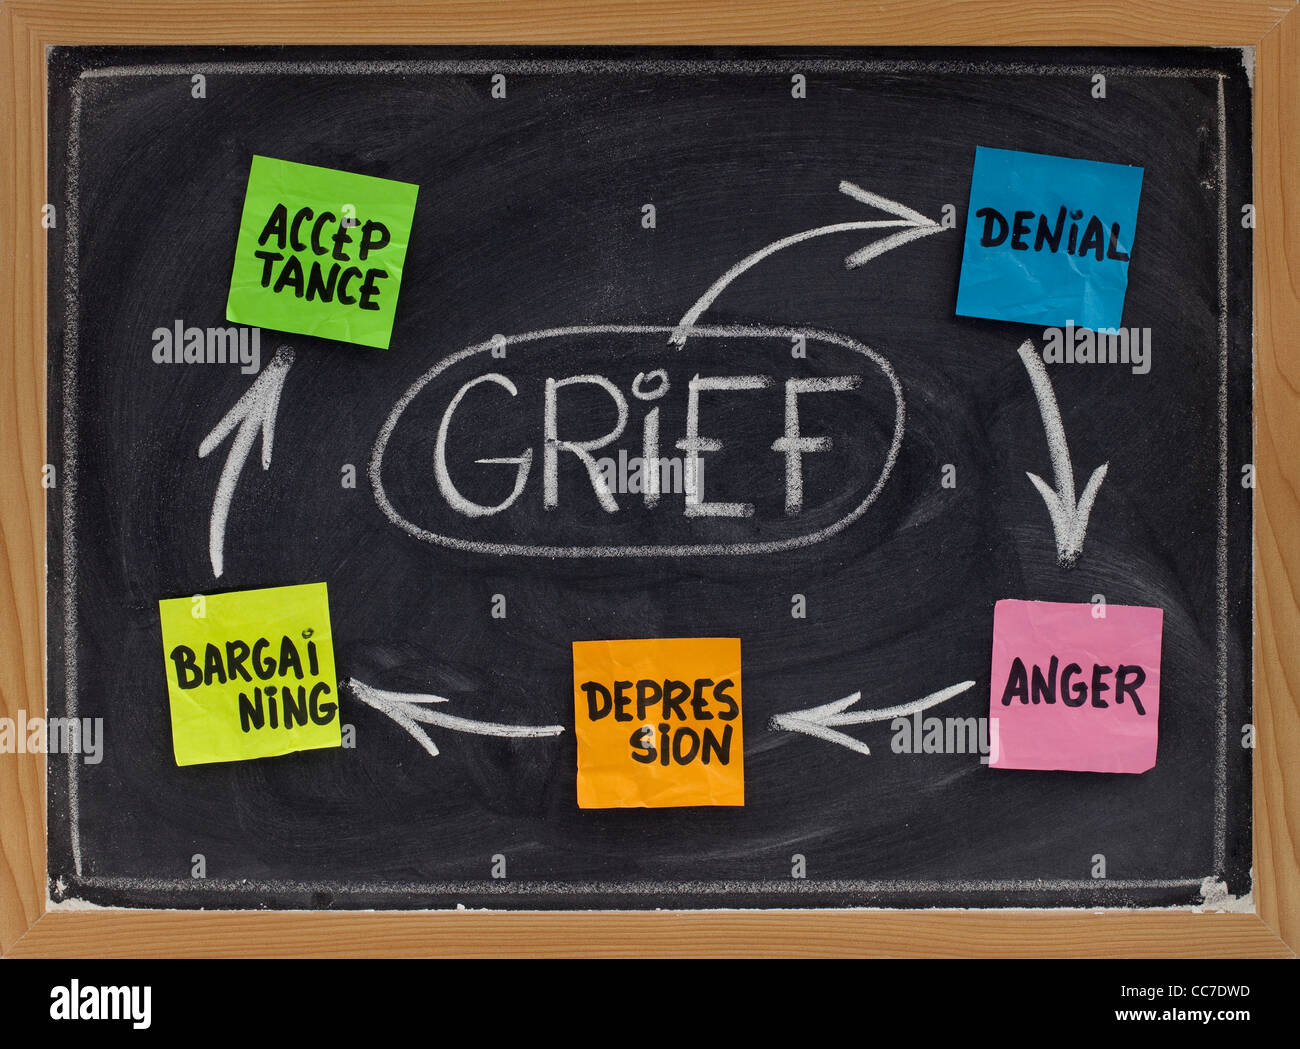 the 5 stages of grief (denial, anger, bargaining, depression, acceptance) - concept Stock Photo